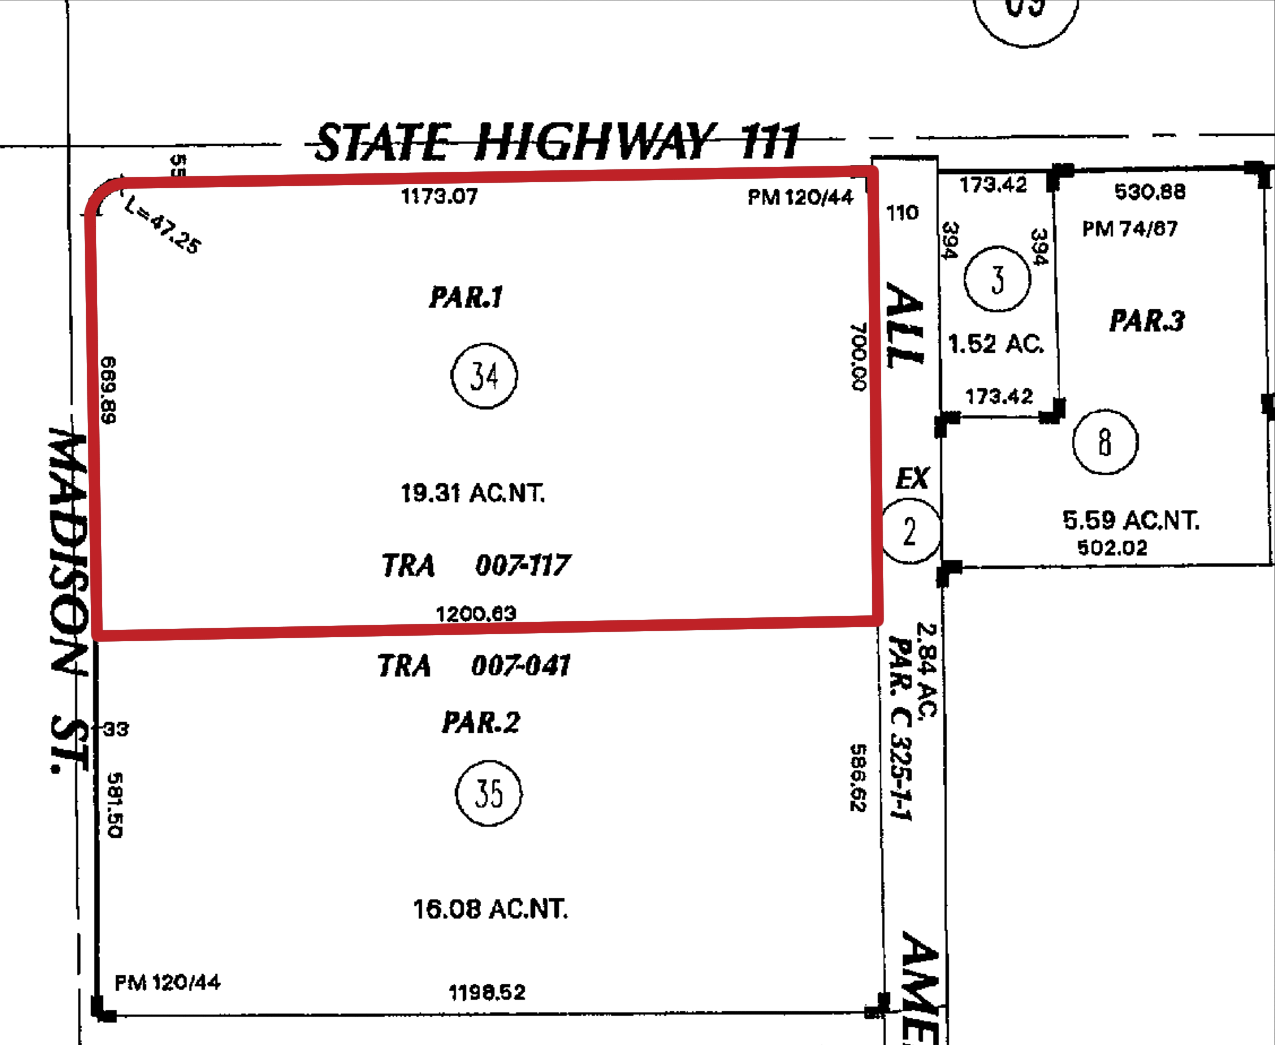 19.31 AC SEC Hwy 111 & Madison St, IN Parcel Map Web